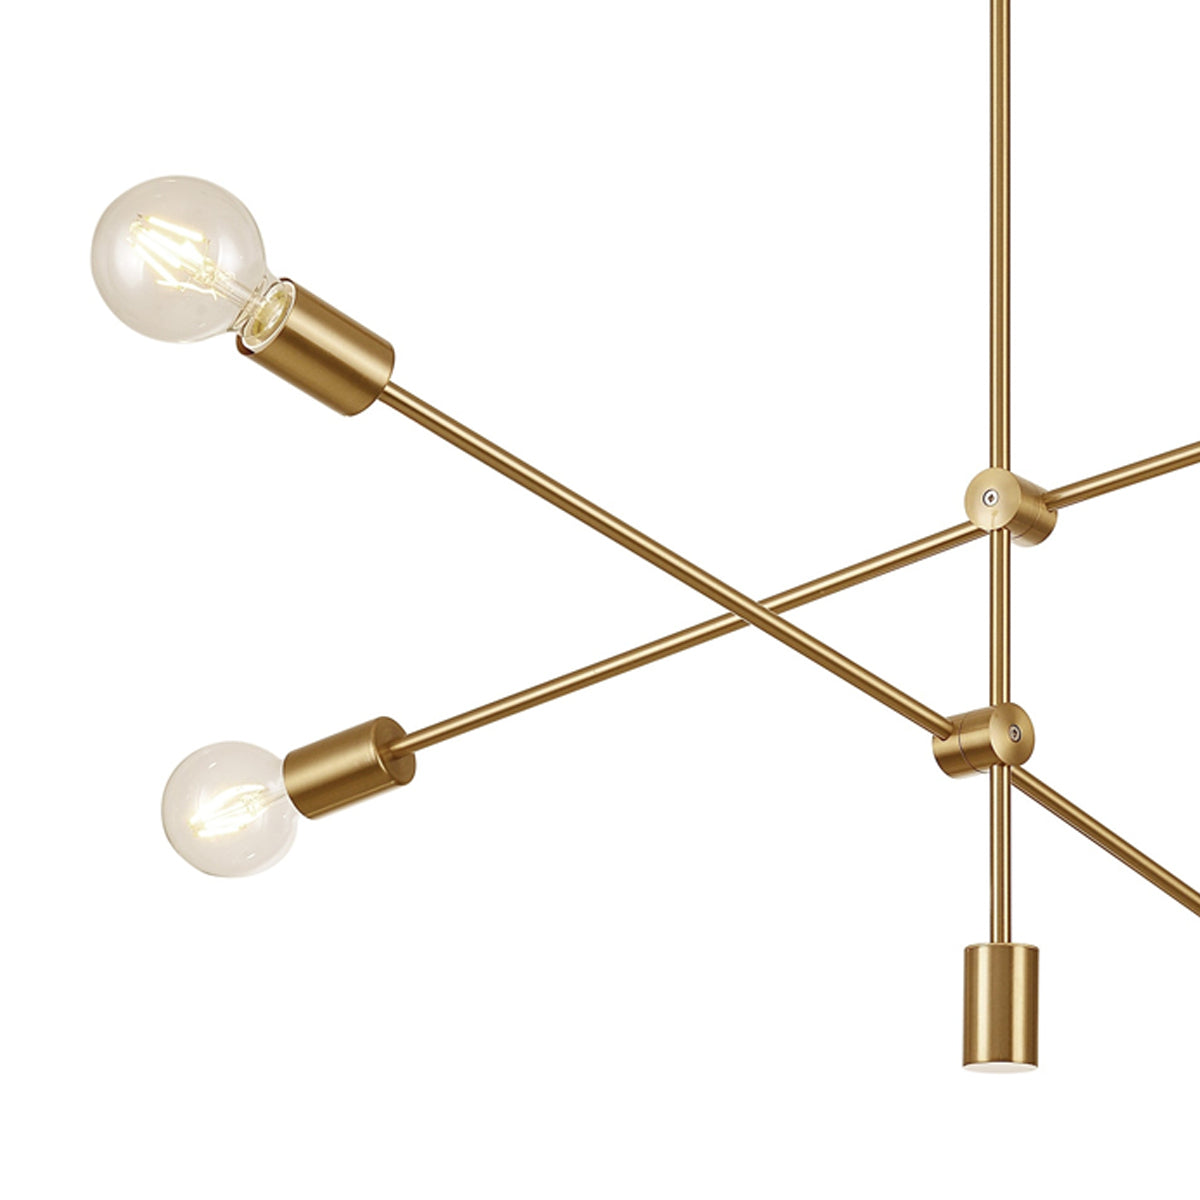 The modern gold brushed brass sputnik chandelier will add a stylish look with its 2 bar and 4 light design while complementing your room to create the perfect atmosphere. This light fitting is perfect for living room, kitchen, bedroom, office, bars, cafes, restaurants, corridors and more.